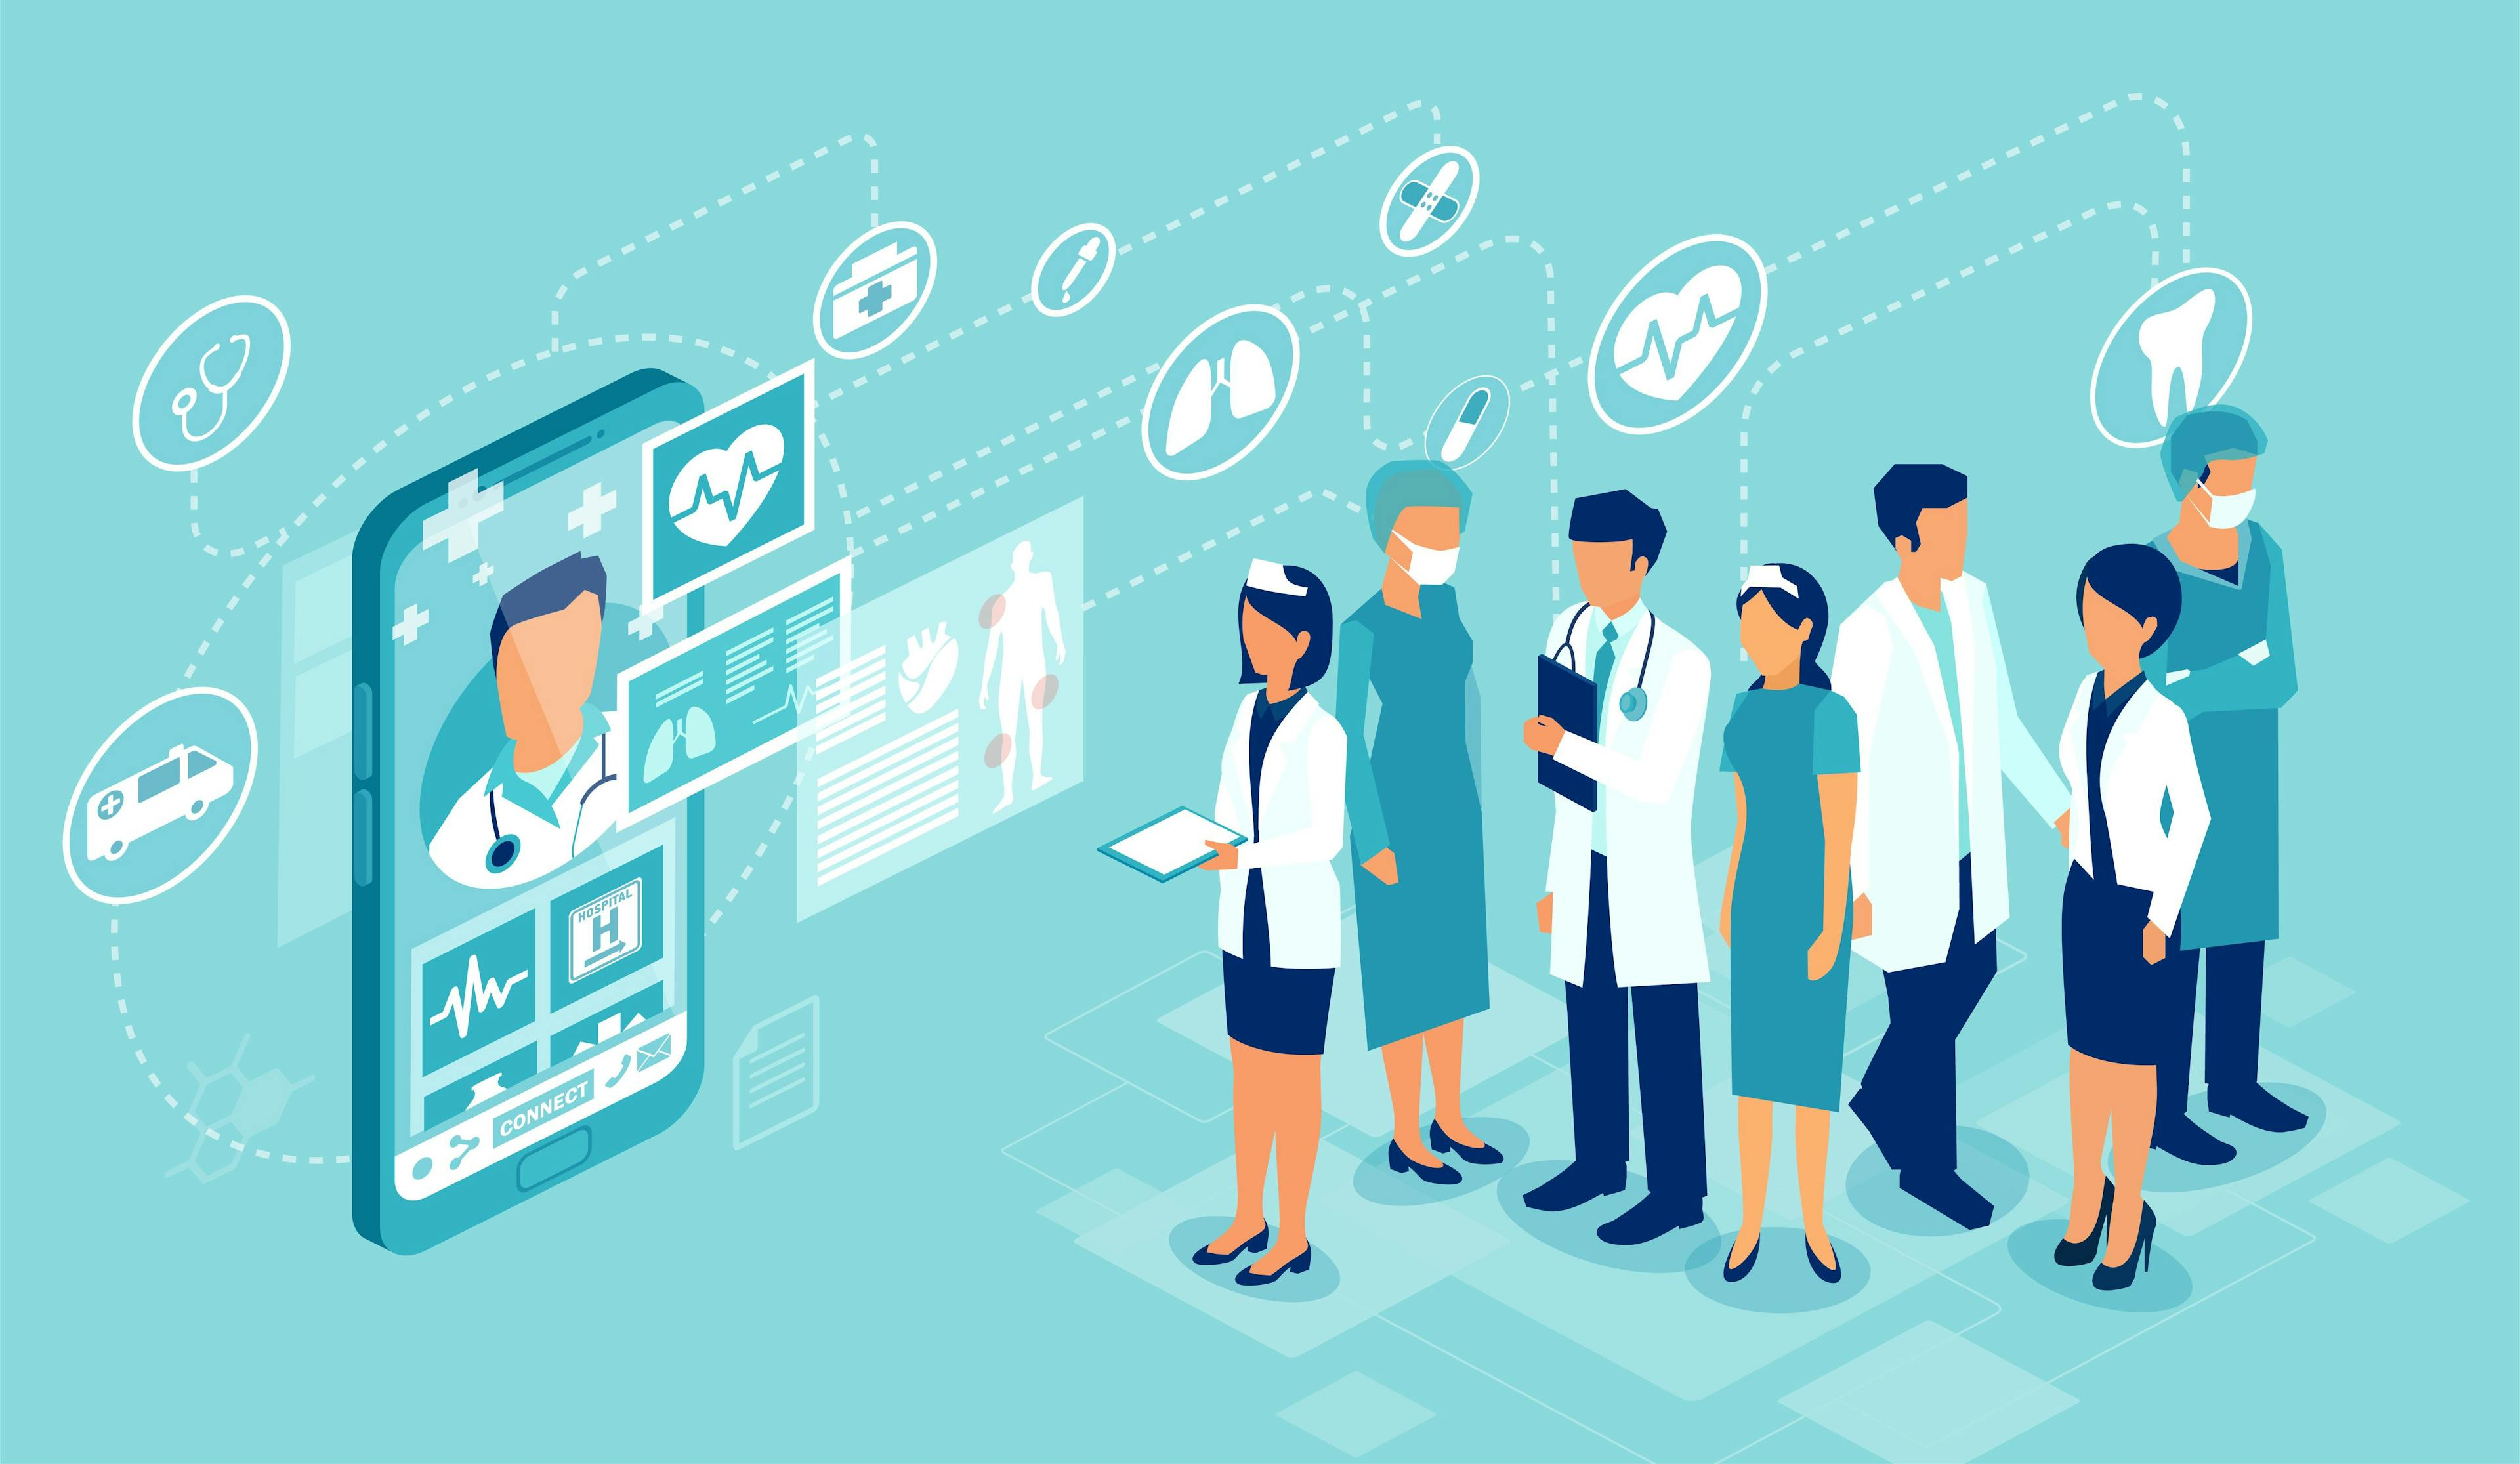 3 Approaches to Creating a Connected Care Future